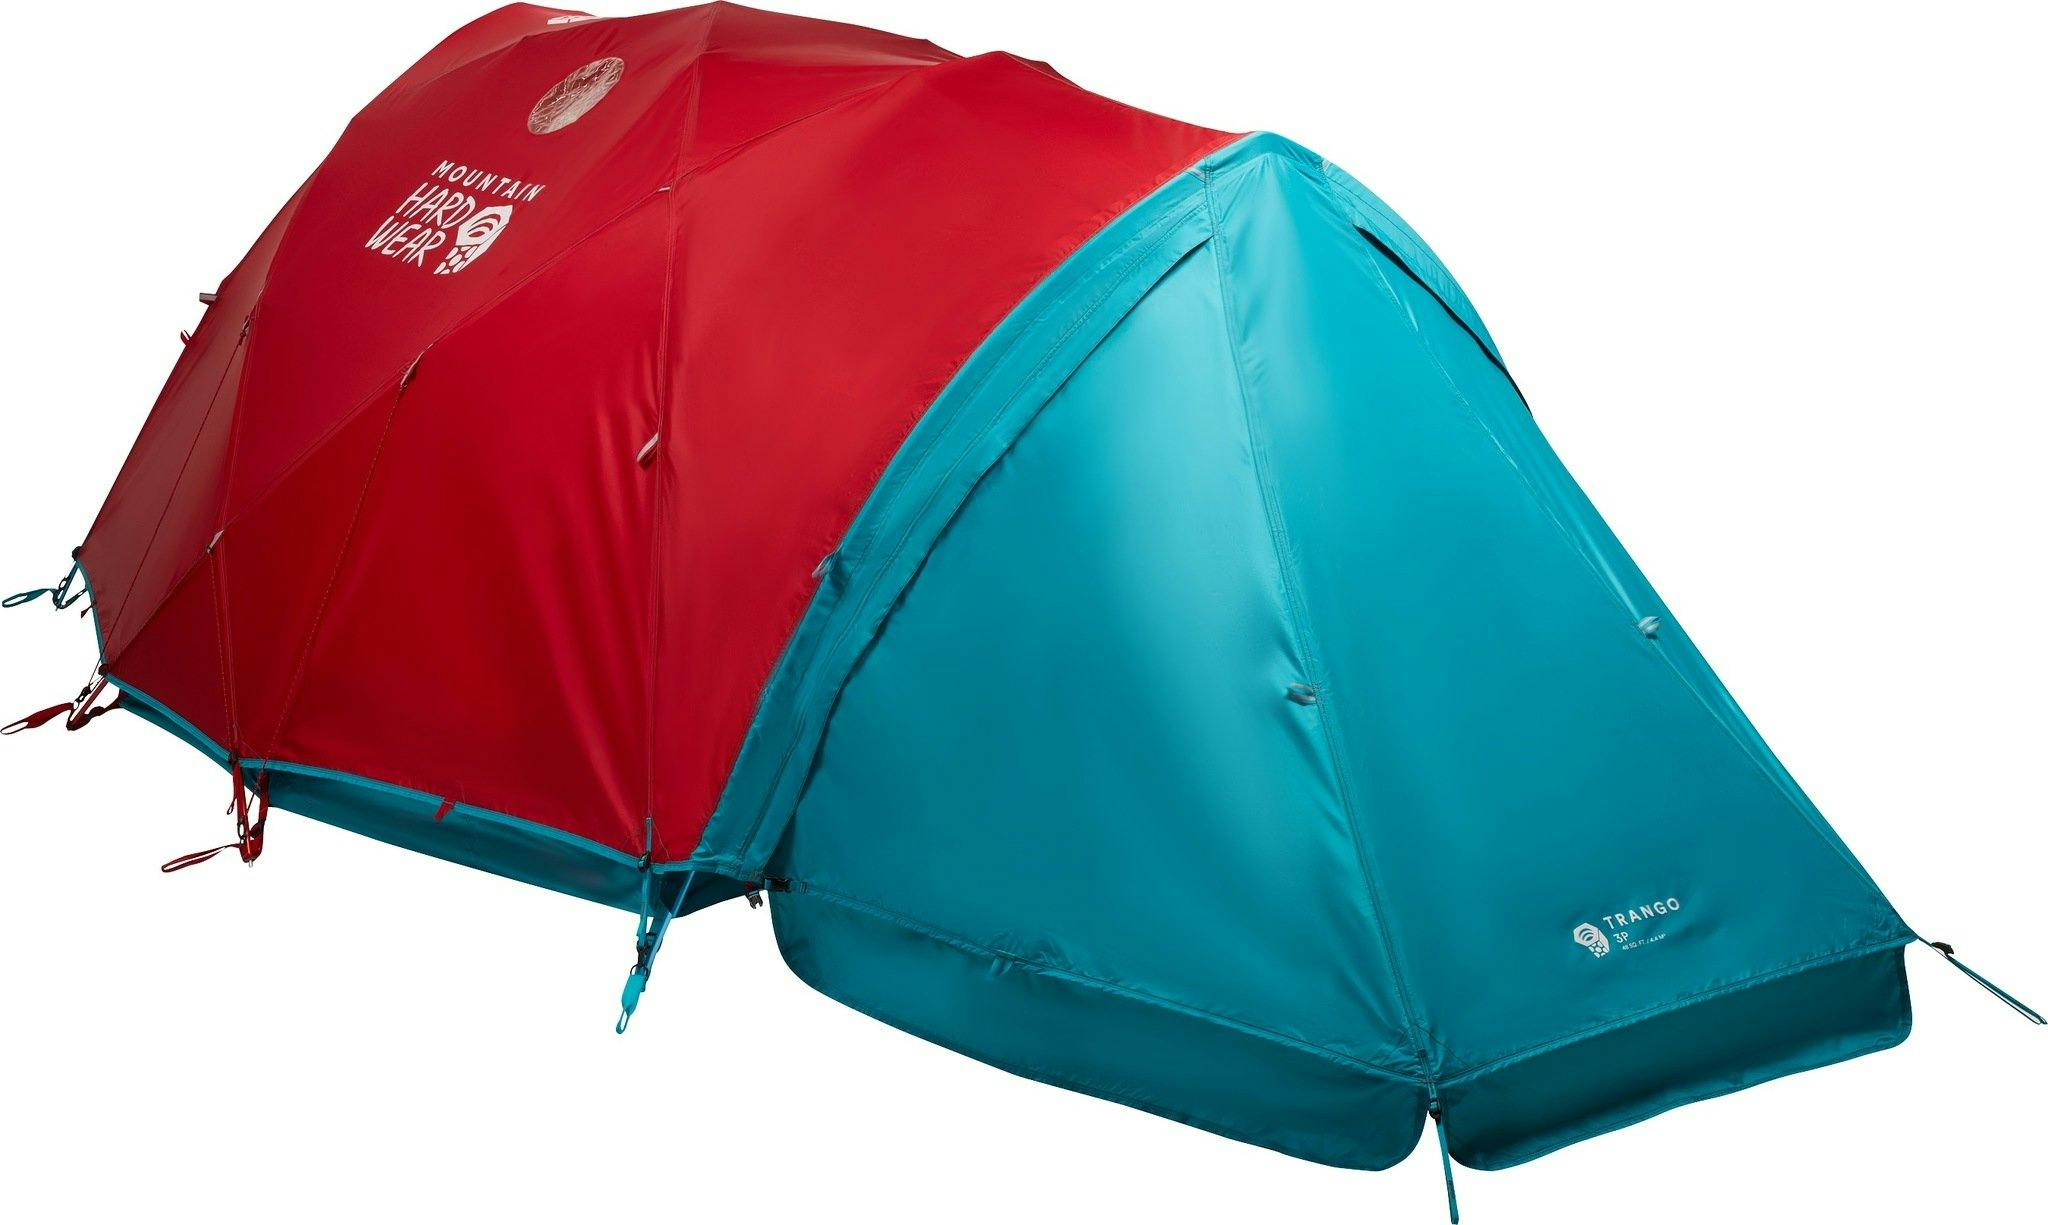 Product image for Trango 3 Tent